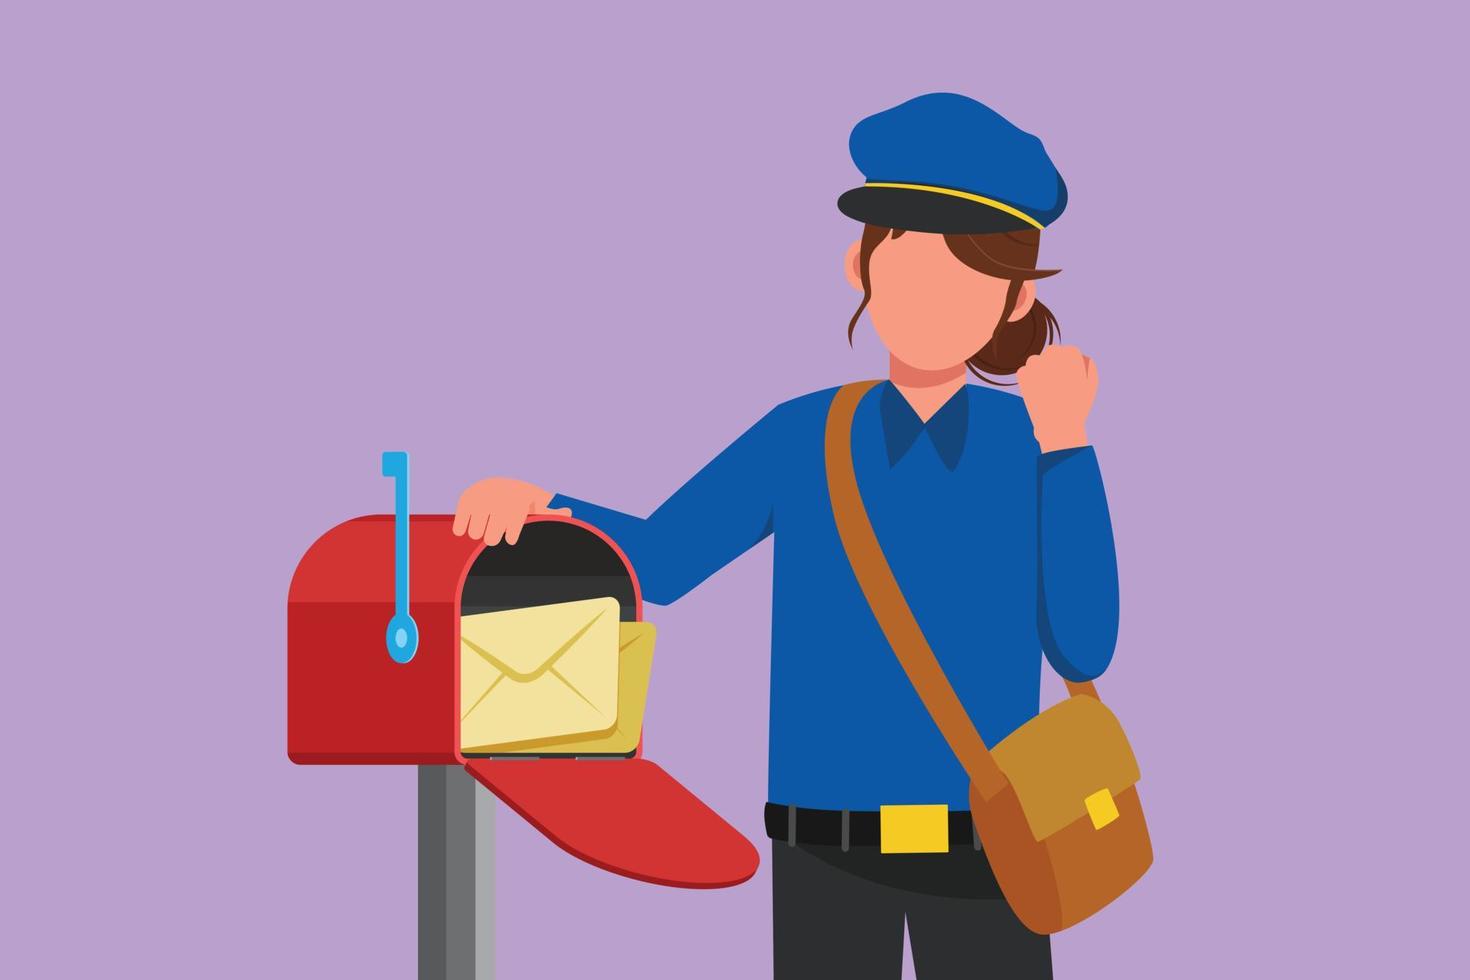 Cartoon flat style drawing postwoman holds envelope on mail box with celebrate gesture, wearing hat, bag, and uniform, working hard to delivery mail to home address. Graphic design vector illustration